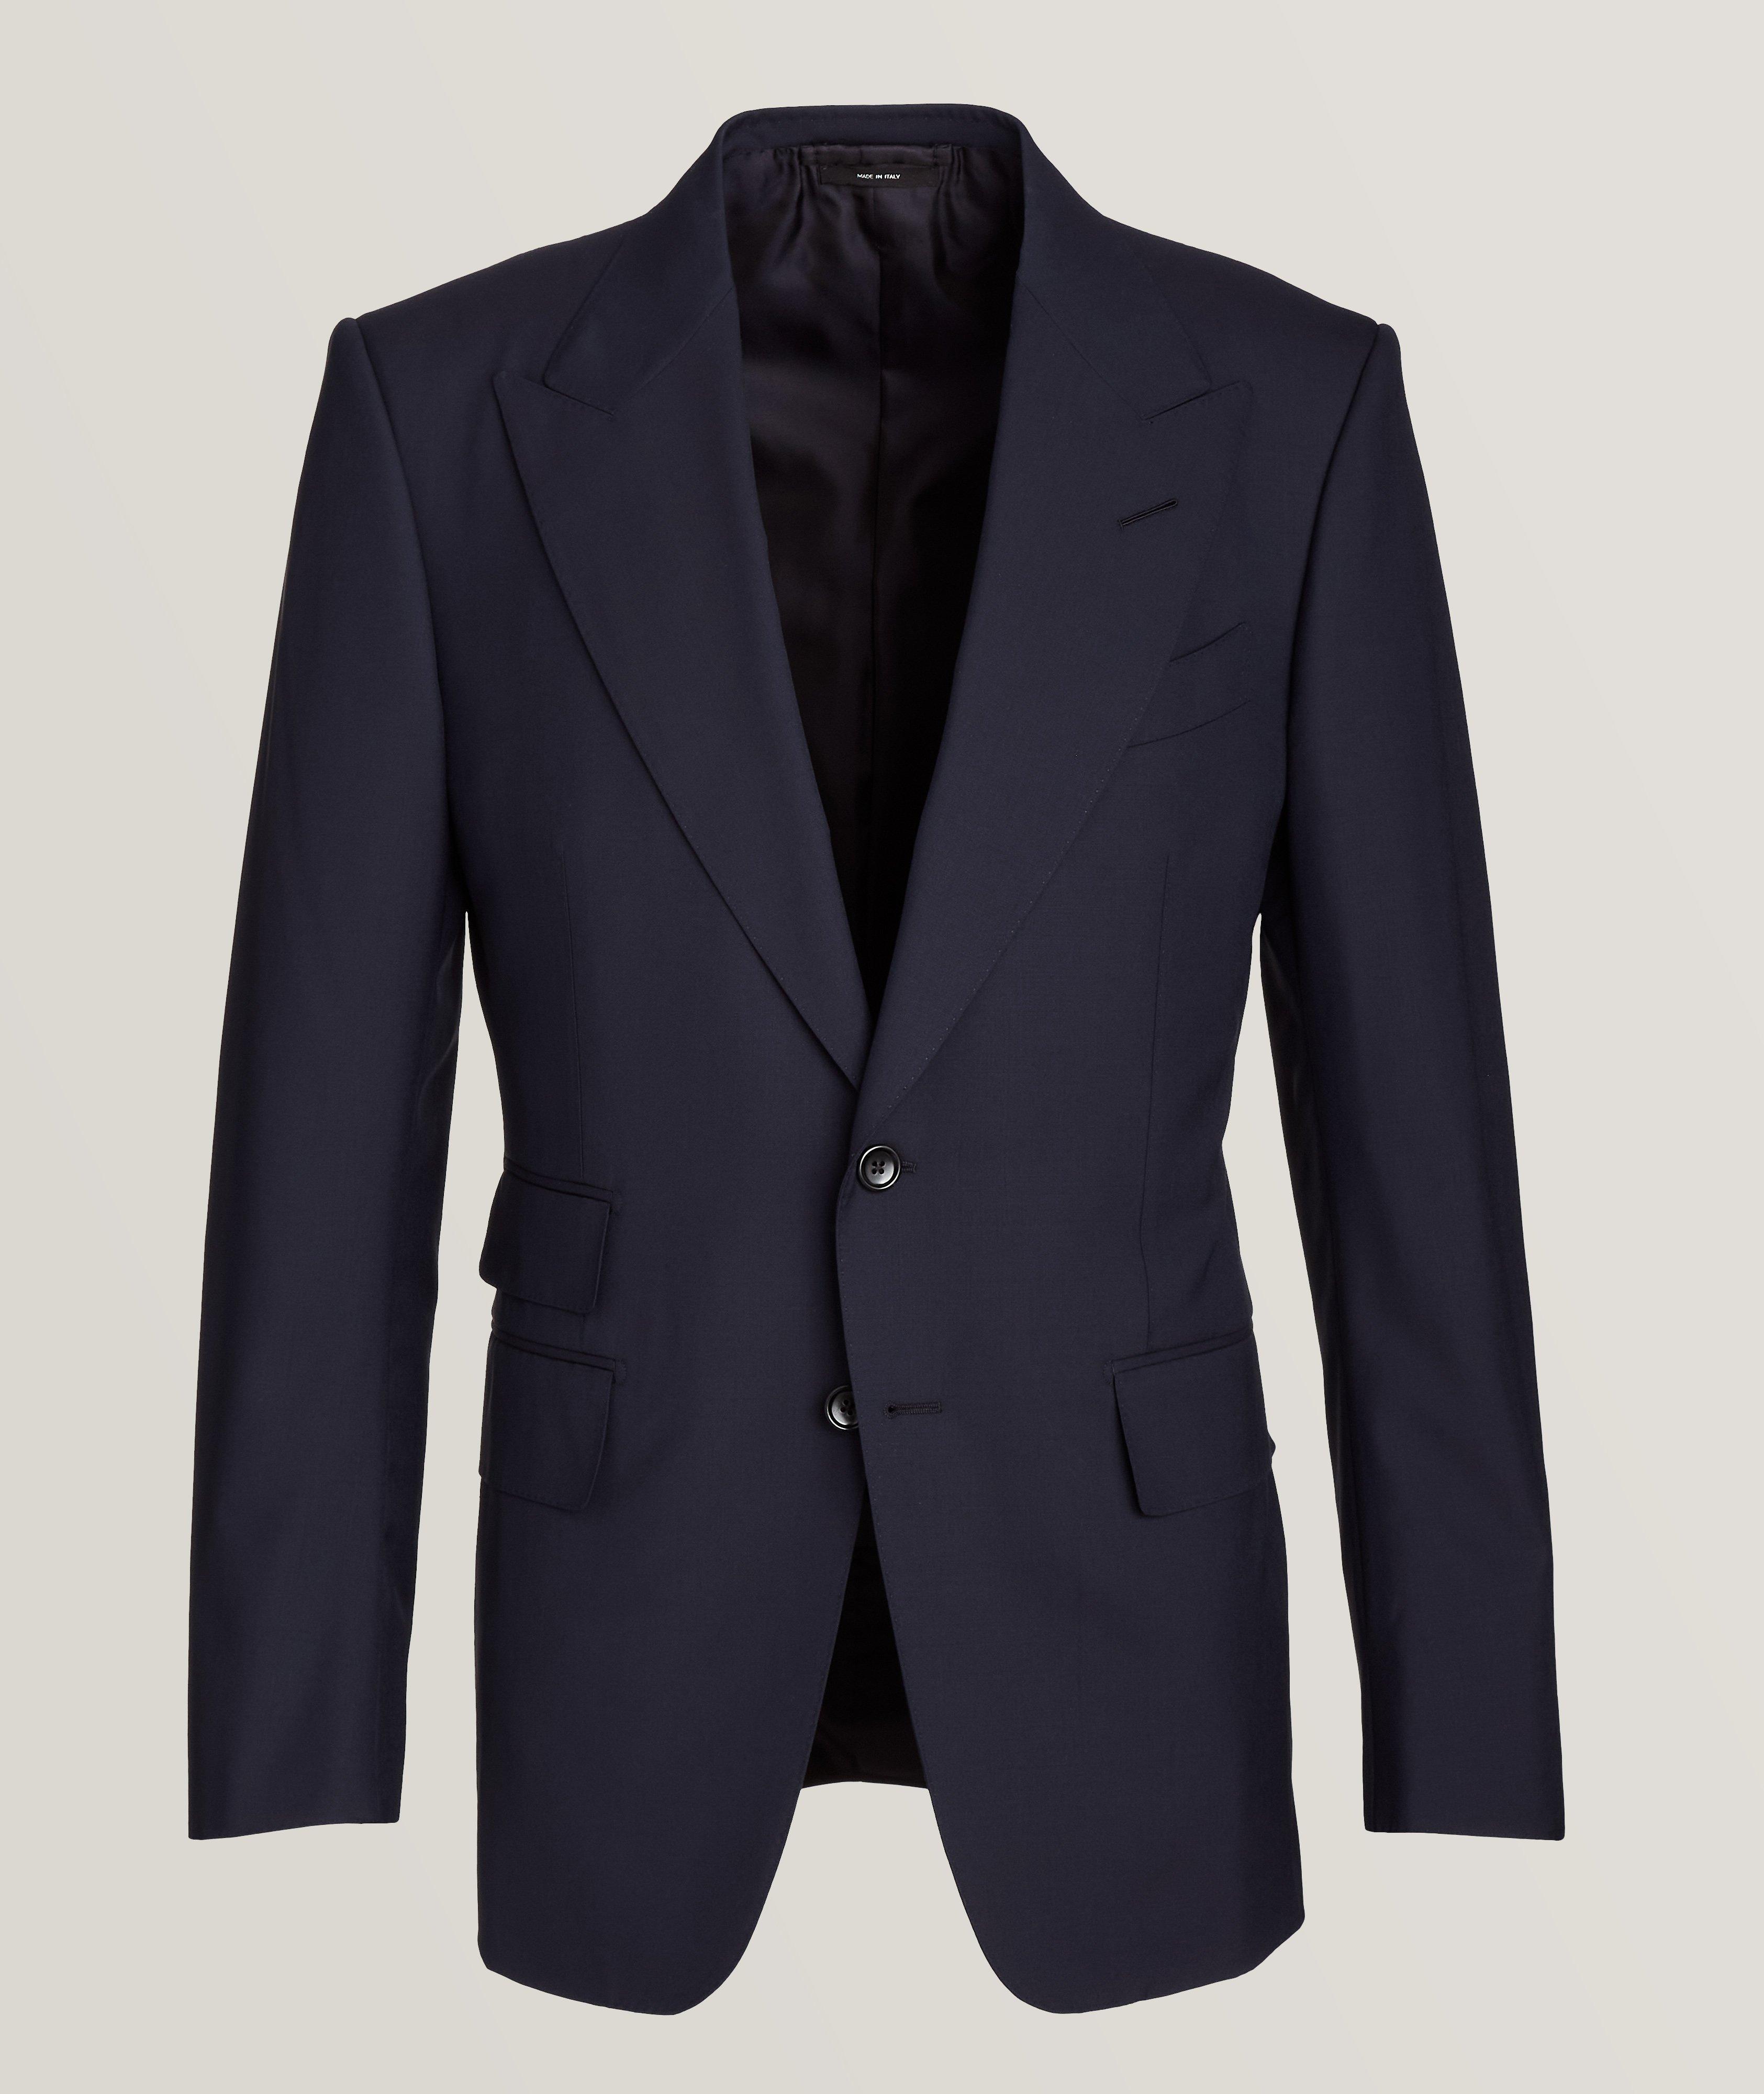 Shelton Solid Wool Suit image 0